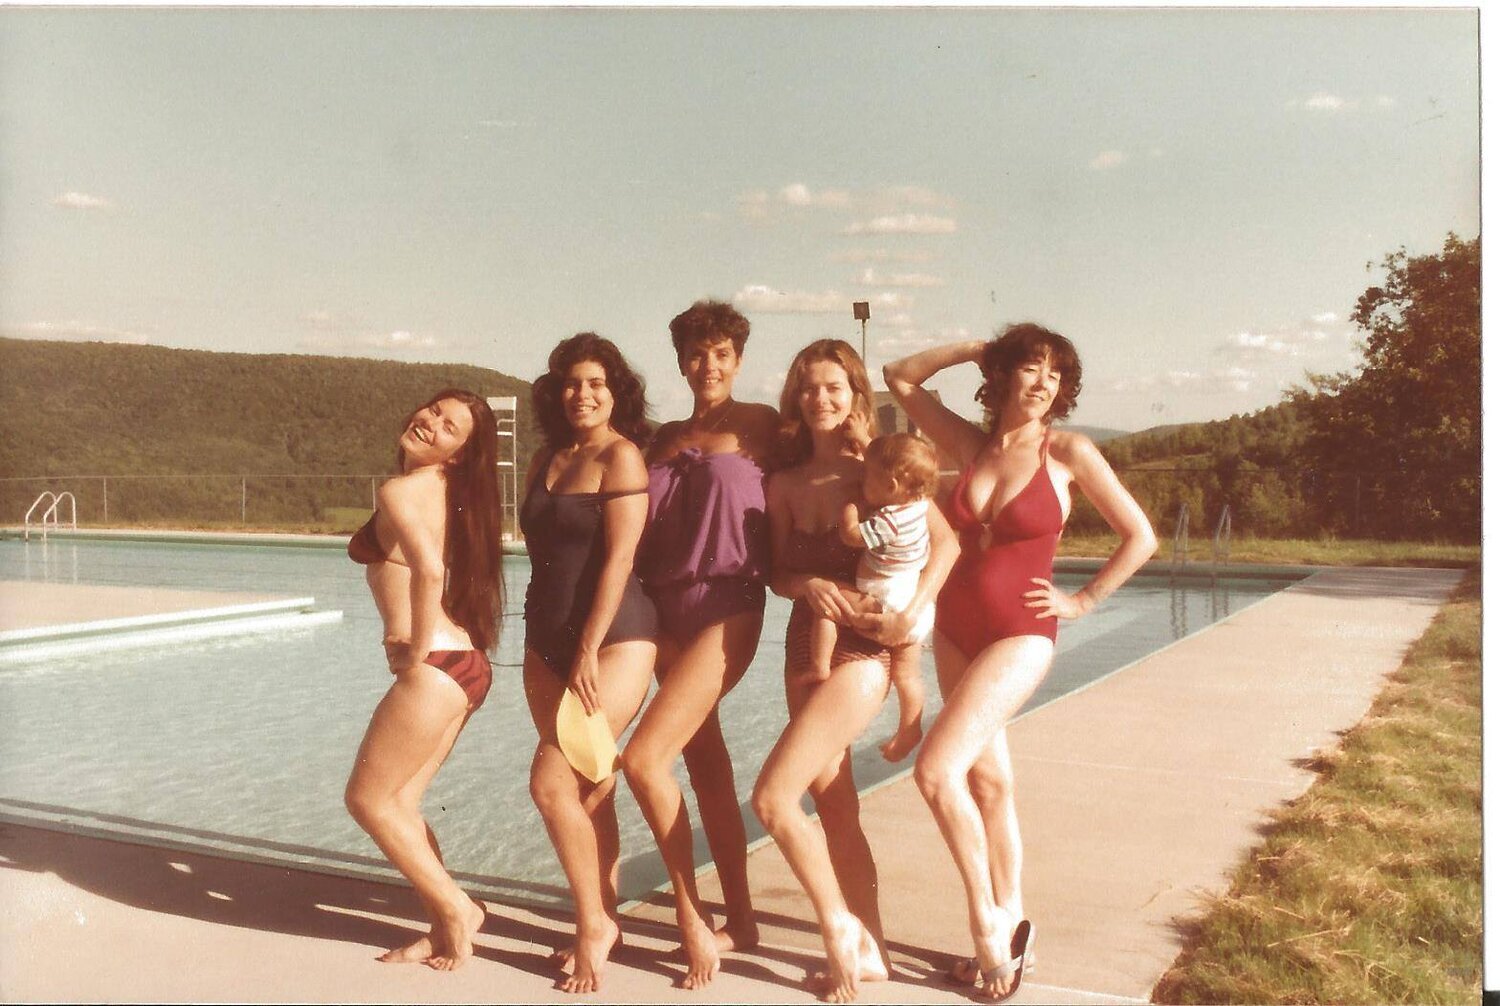 Club 90 circa late 1980s ( left to right): Candida Royalle, Veronica Vera, Gloria Leonard, Veronica Hart (and her son Christopher).